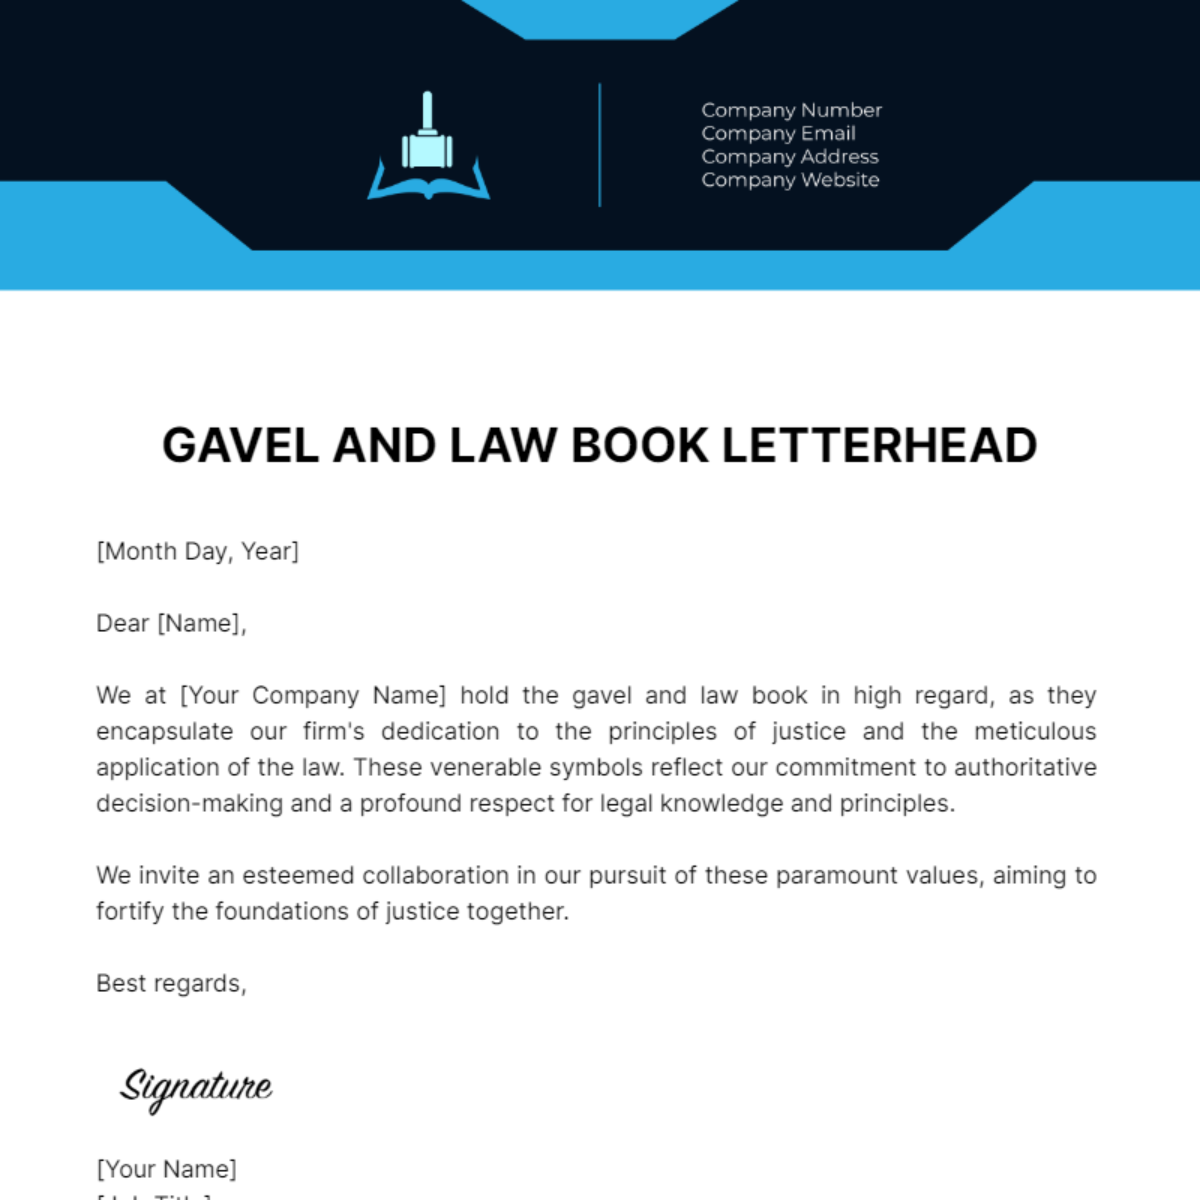 Gavel and Law Book Letterhead Template